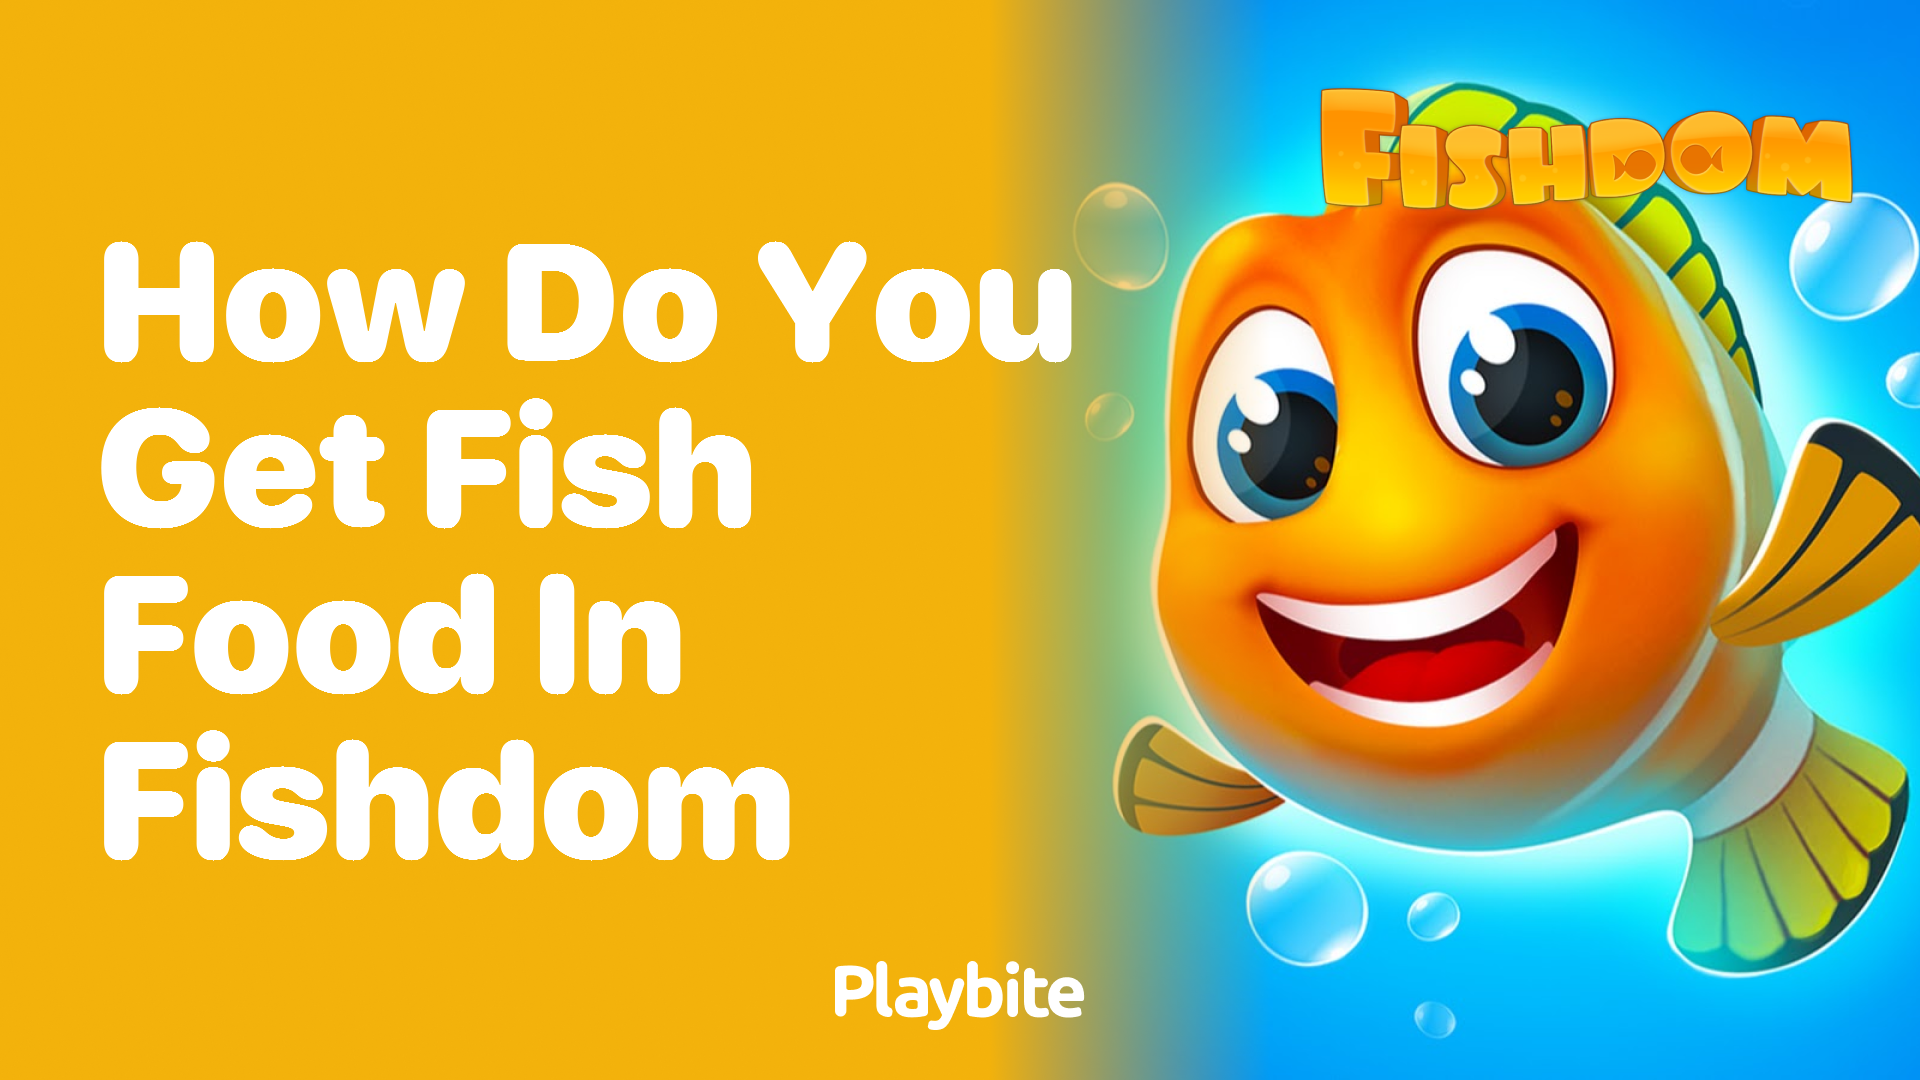 How Do You Get Fish Food in Fishdom?